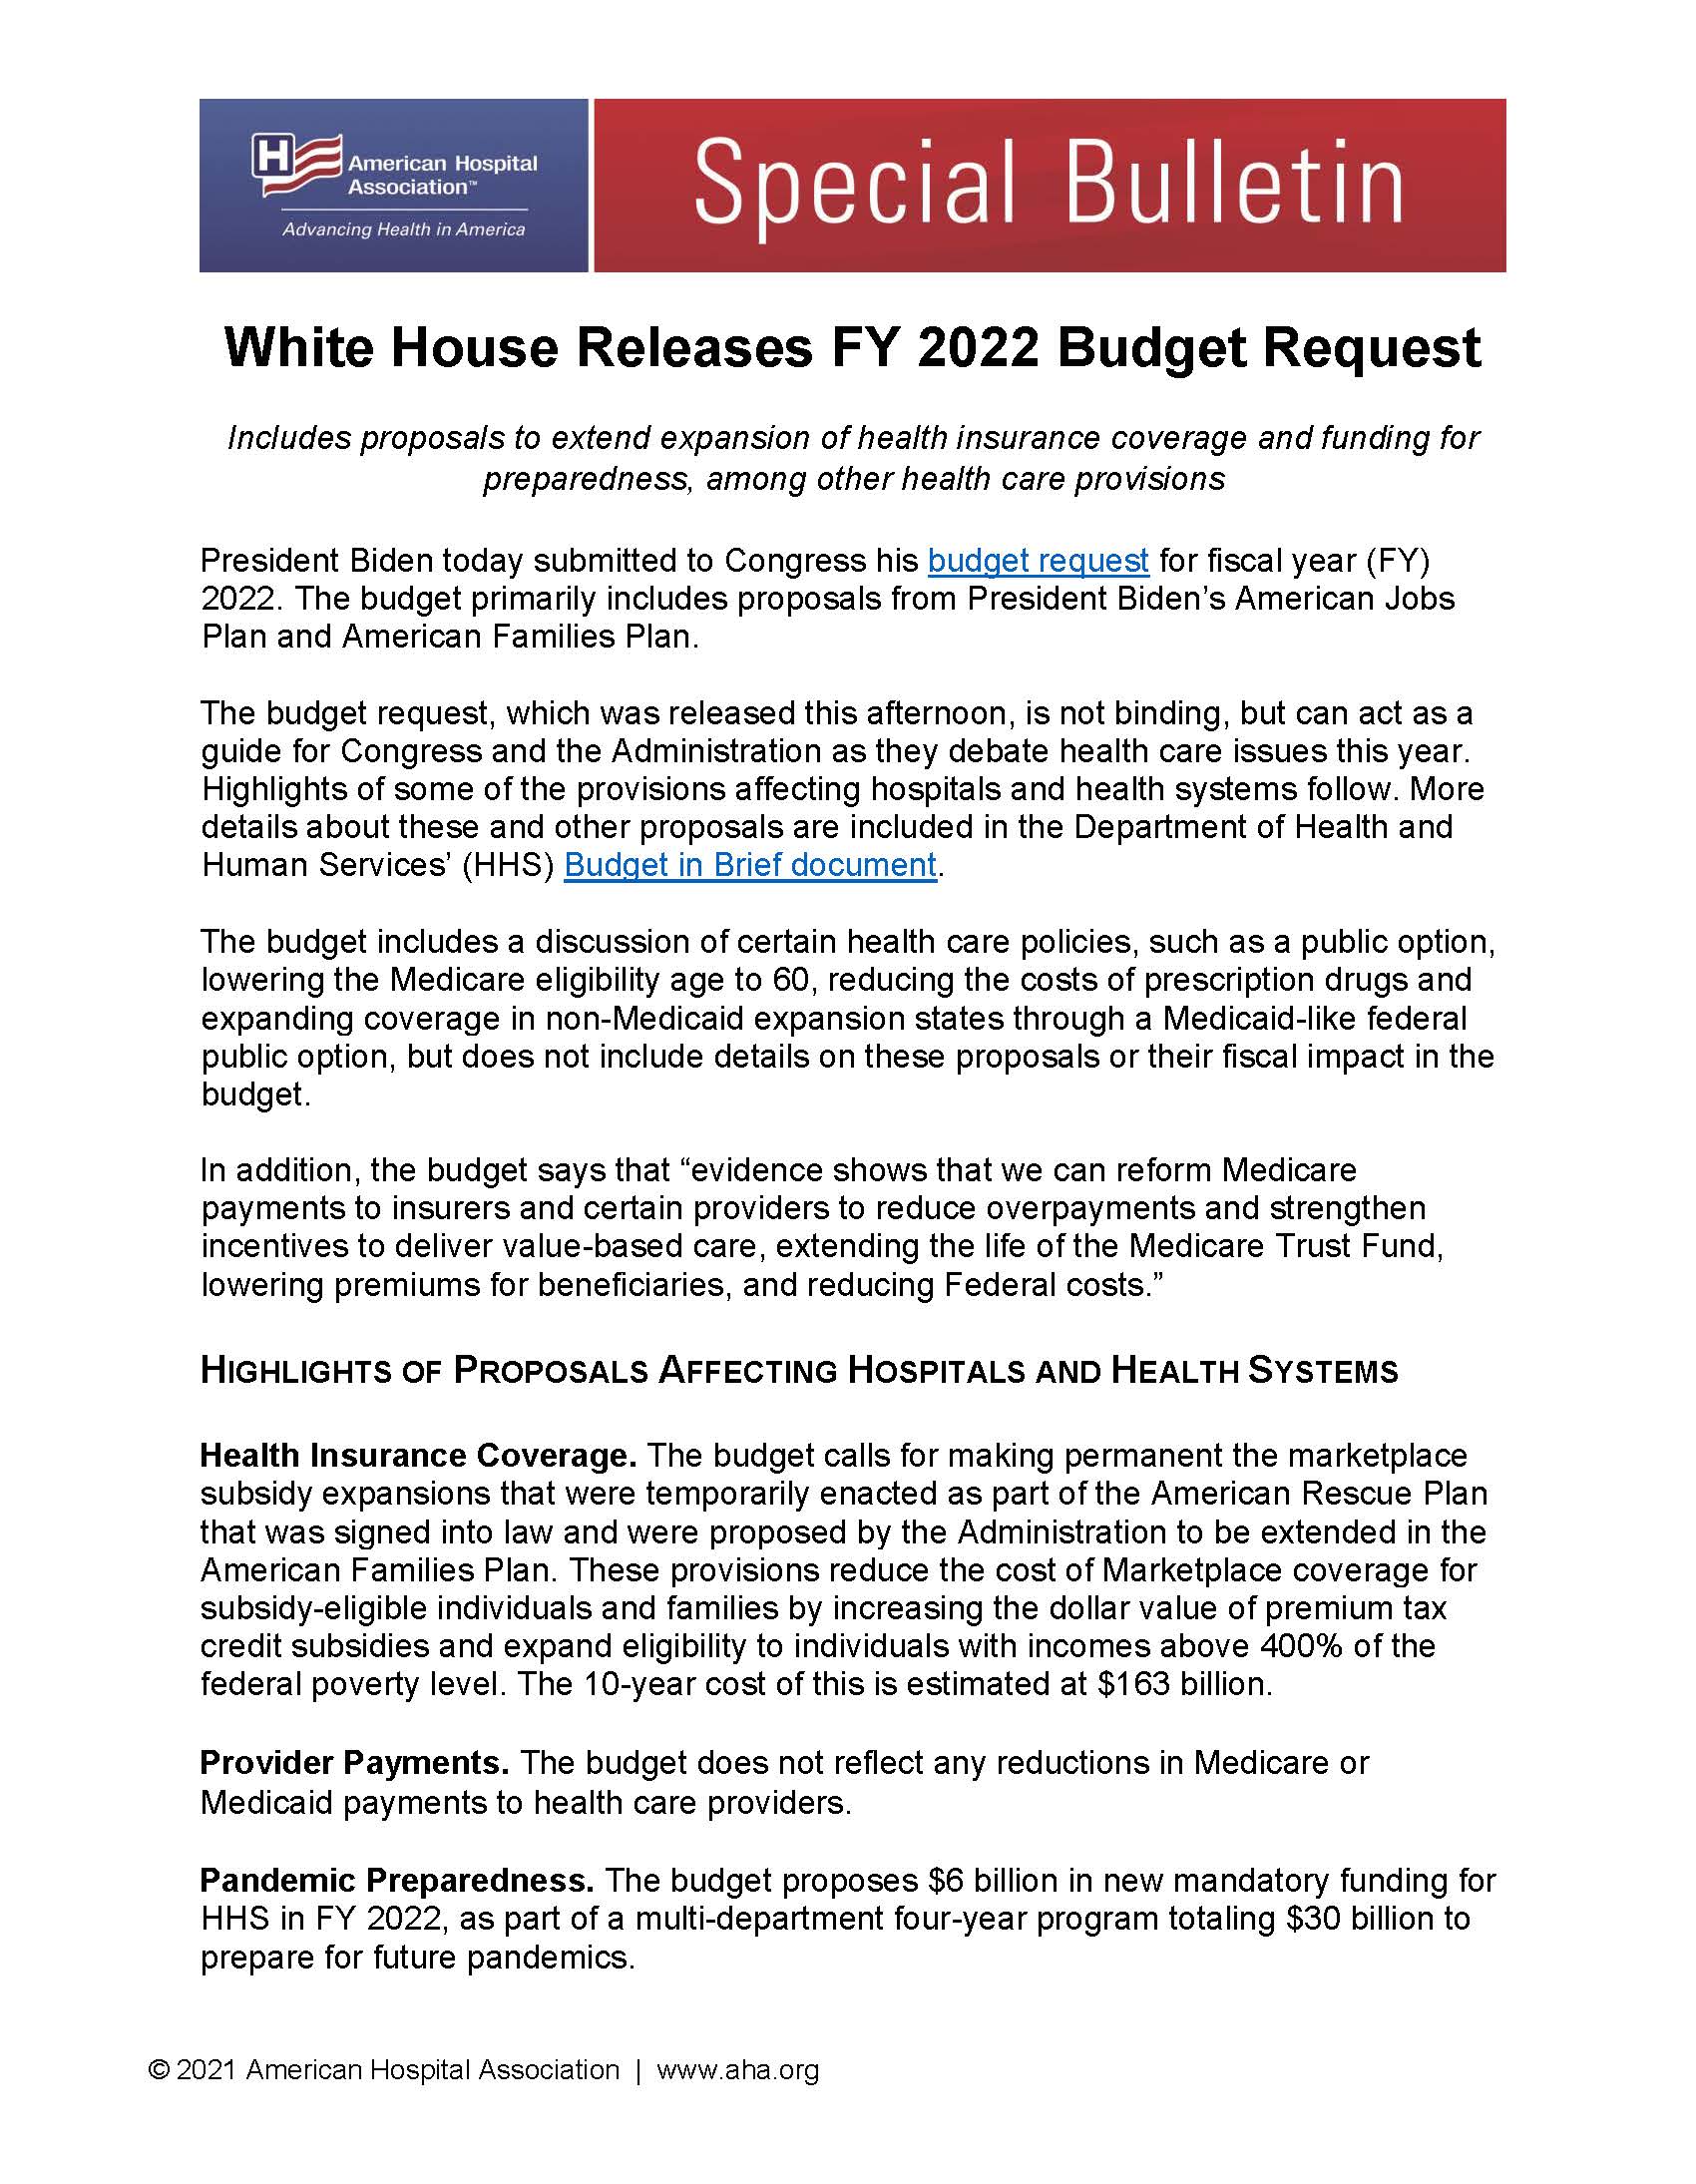 Special Bulletin: White House Releases FY 2022 Budget Request page 1.